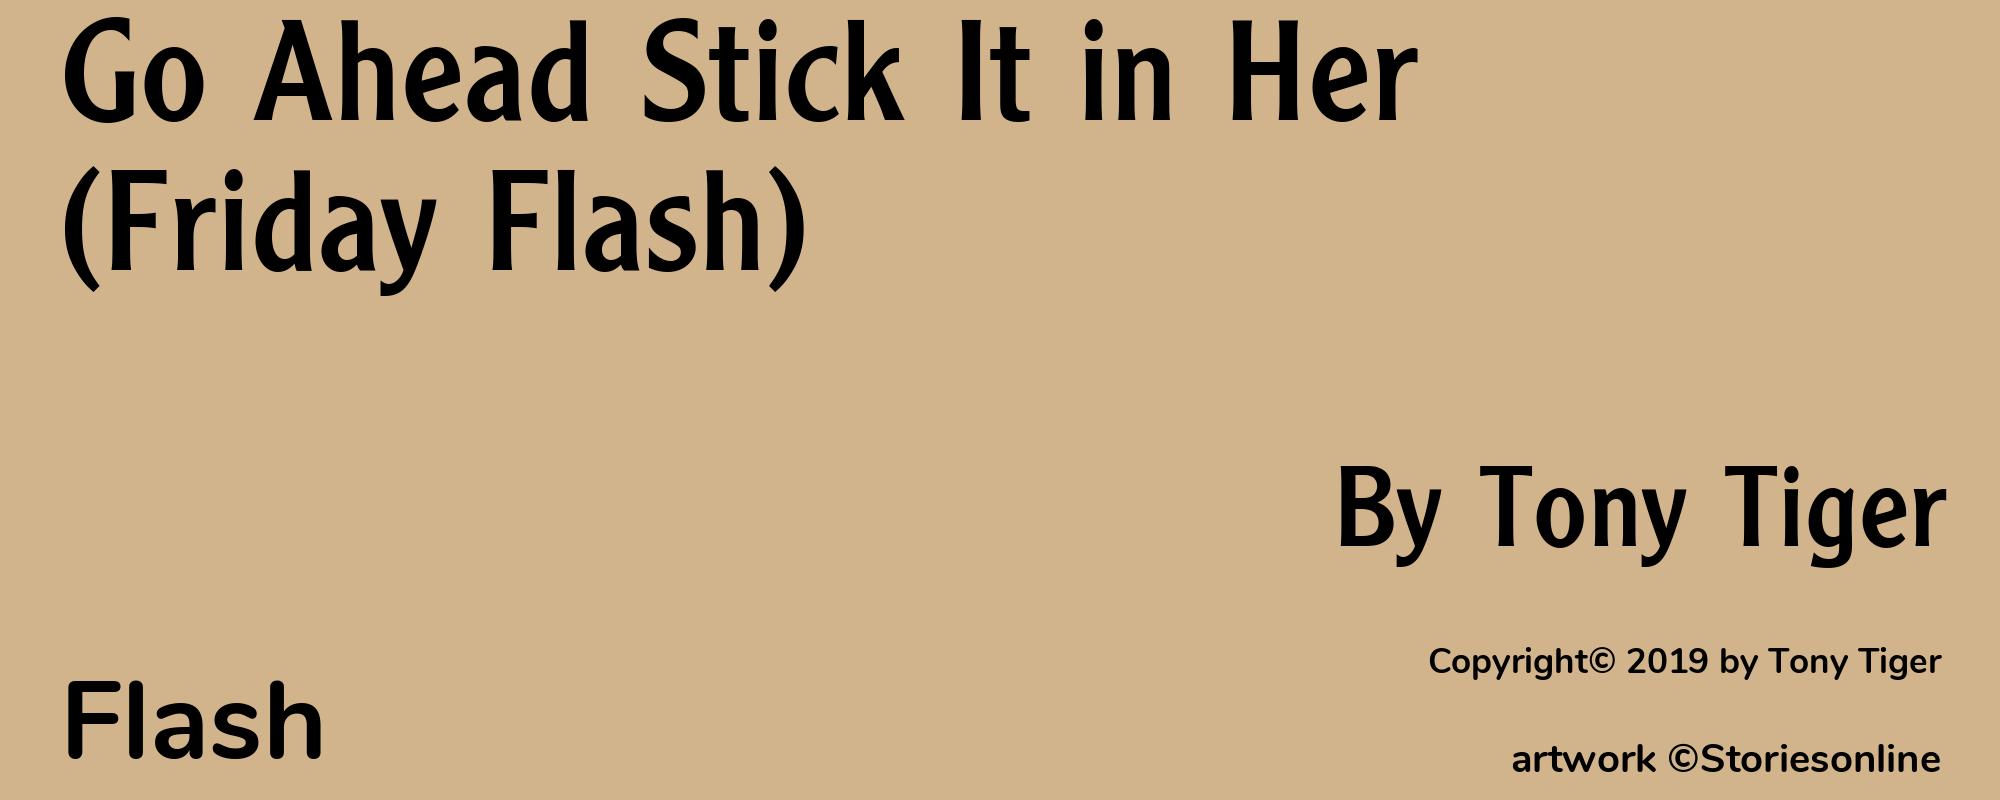 Go Ahead Stick It in Her (Friday Flash) - Cover